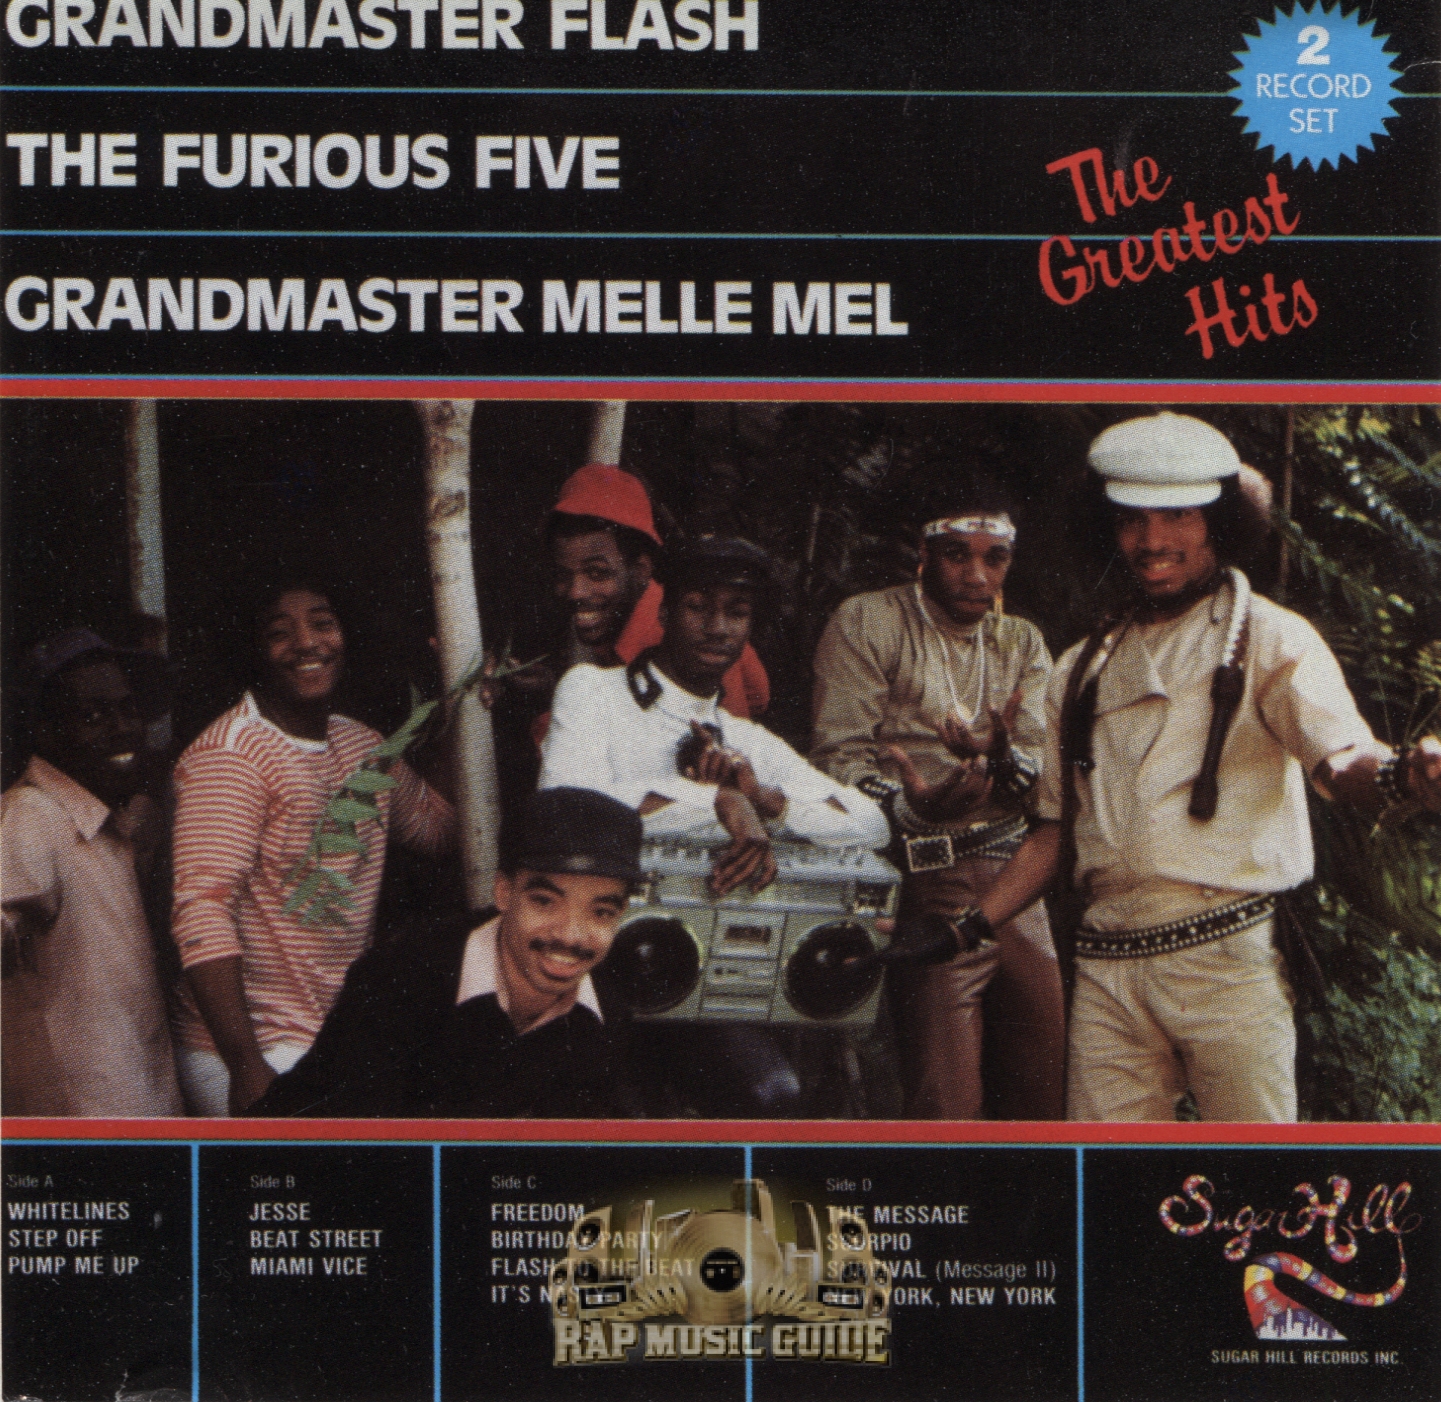 Grandmaster Flash & the Furious Five Greatest Messages 